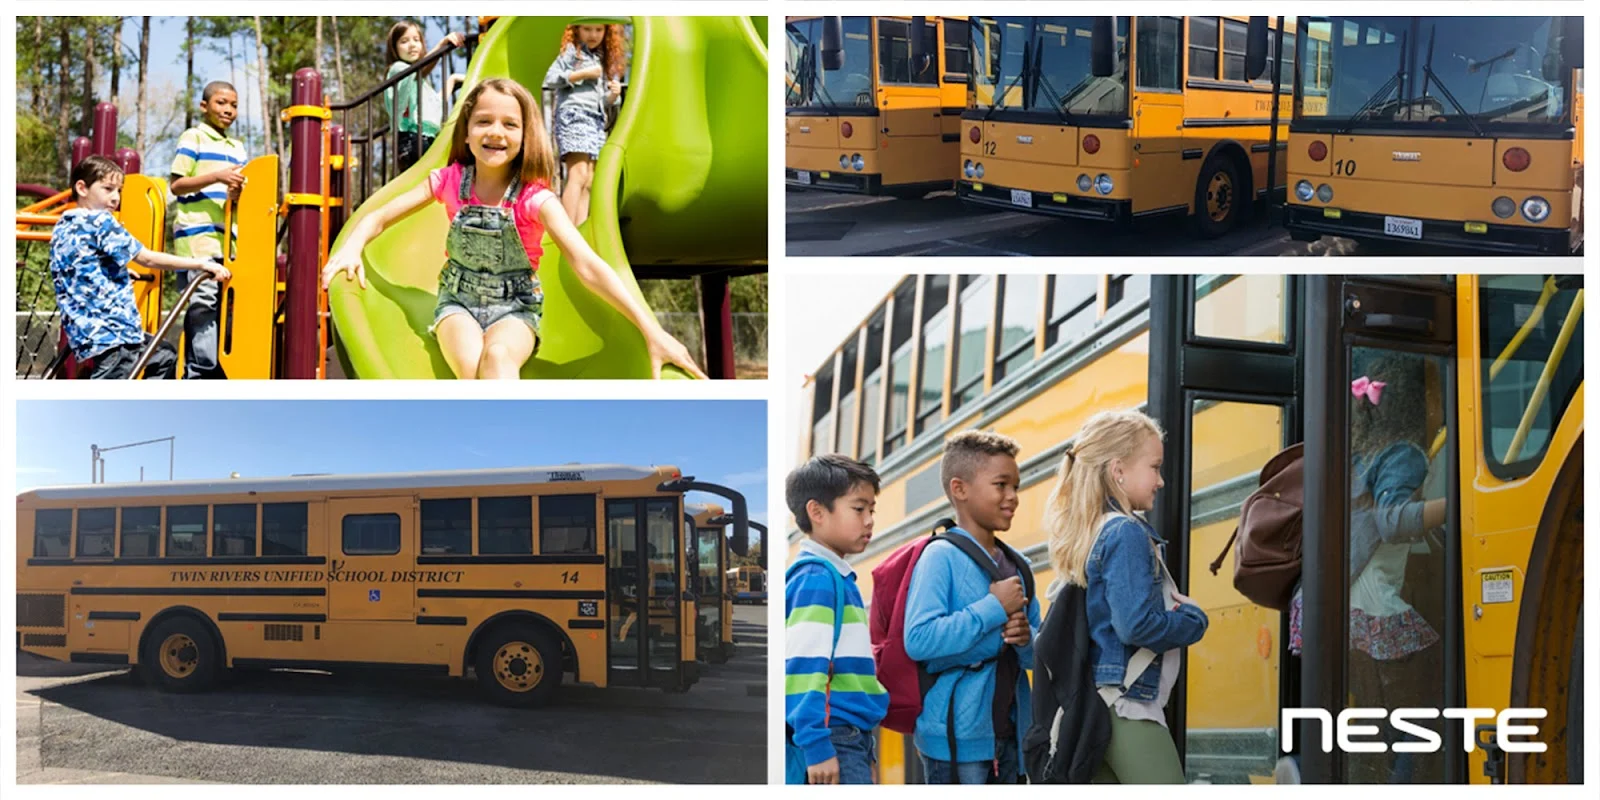 Twin Rivers Unified School district switched 75 diesel-powered school buses to run on renewable diesel fuel provided by Neste, helping make its fleet one of the cleanest in the country. 